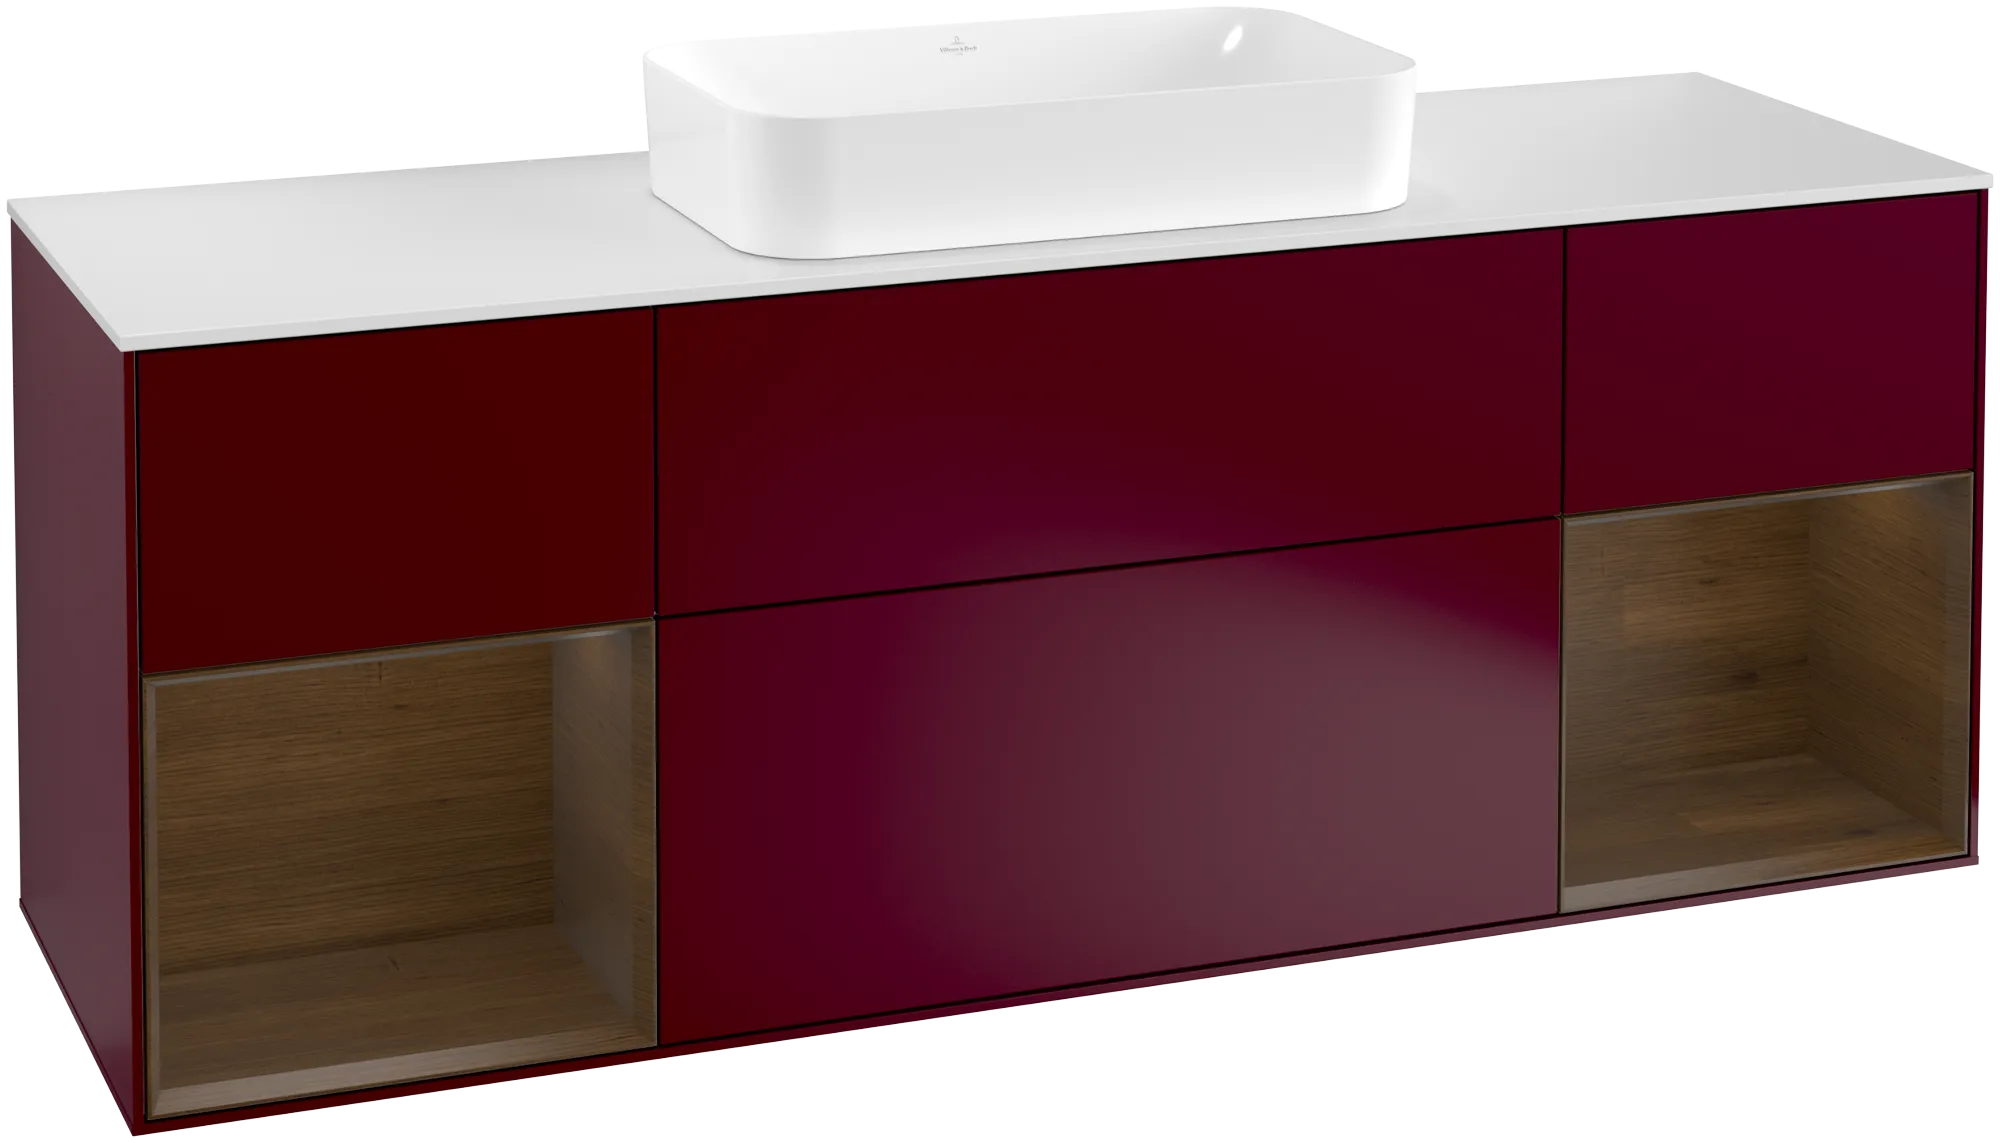 Picture of VILLEROY BOCH Finion Vanity unit, with lighting, 4 pull-out compartments, 1600 x 603 x 501 mm, Peony Matt Lacquer / Walnut Veneer / Glass White Matt #G331GNHB